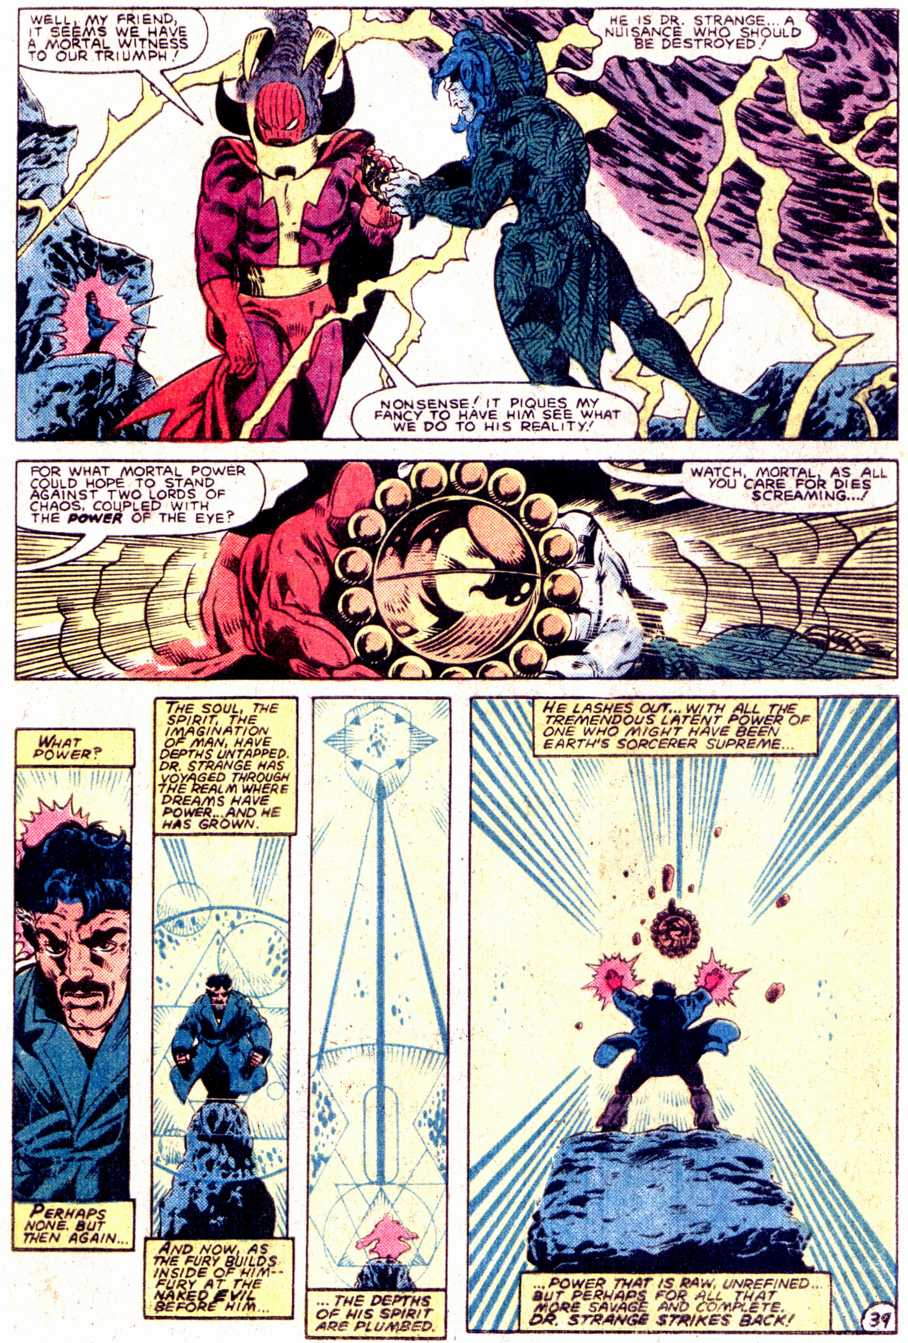 What If? (1977) issue 40 - Dr Strange had not become master of The mystic arts - Page 40